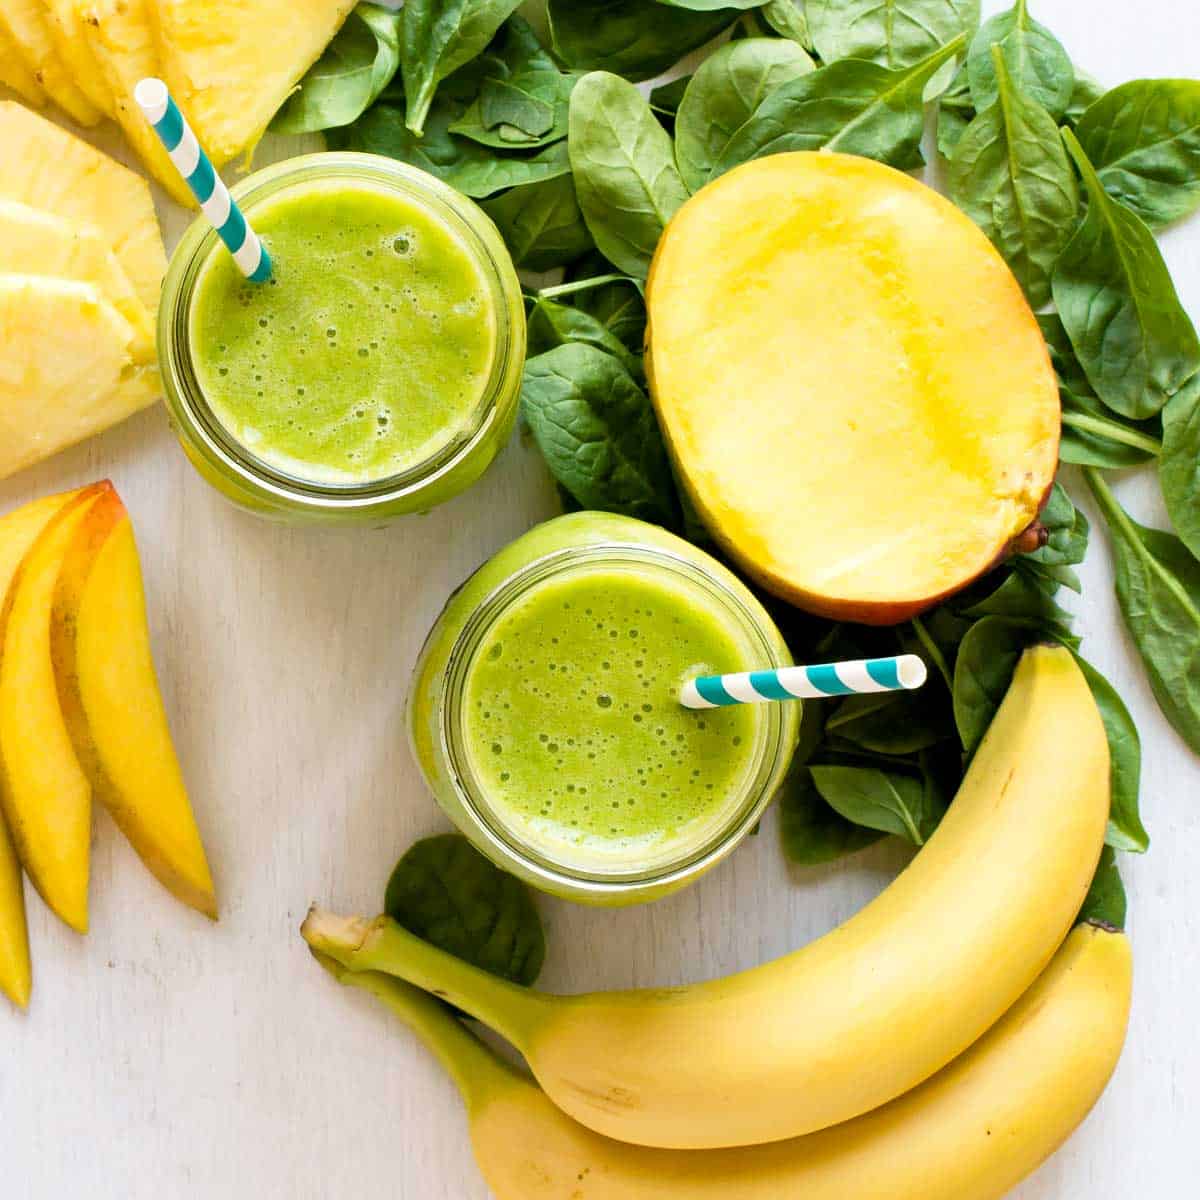 Pineapple And Banana Smoothie: Benefits, Recipe Tips, and Presentation Ideas